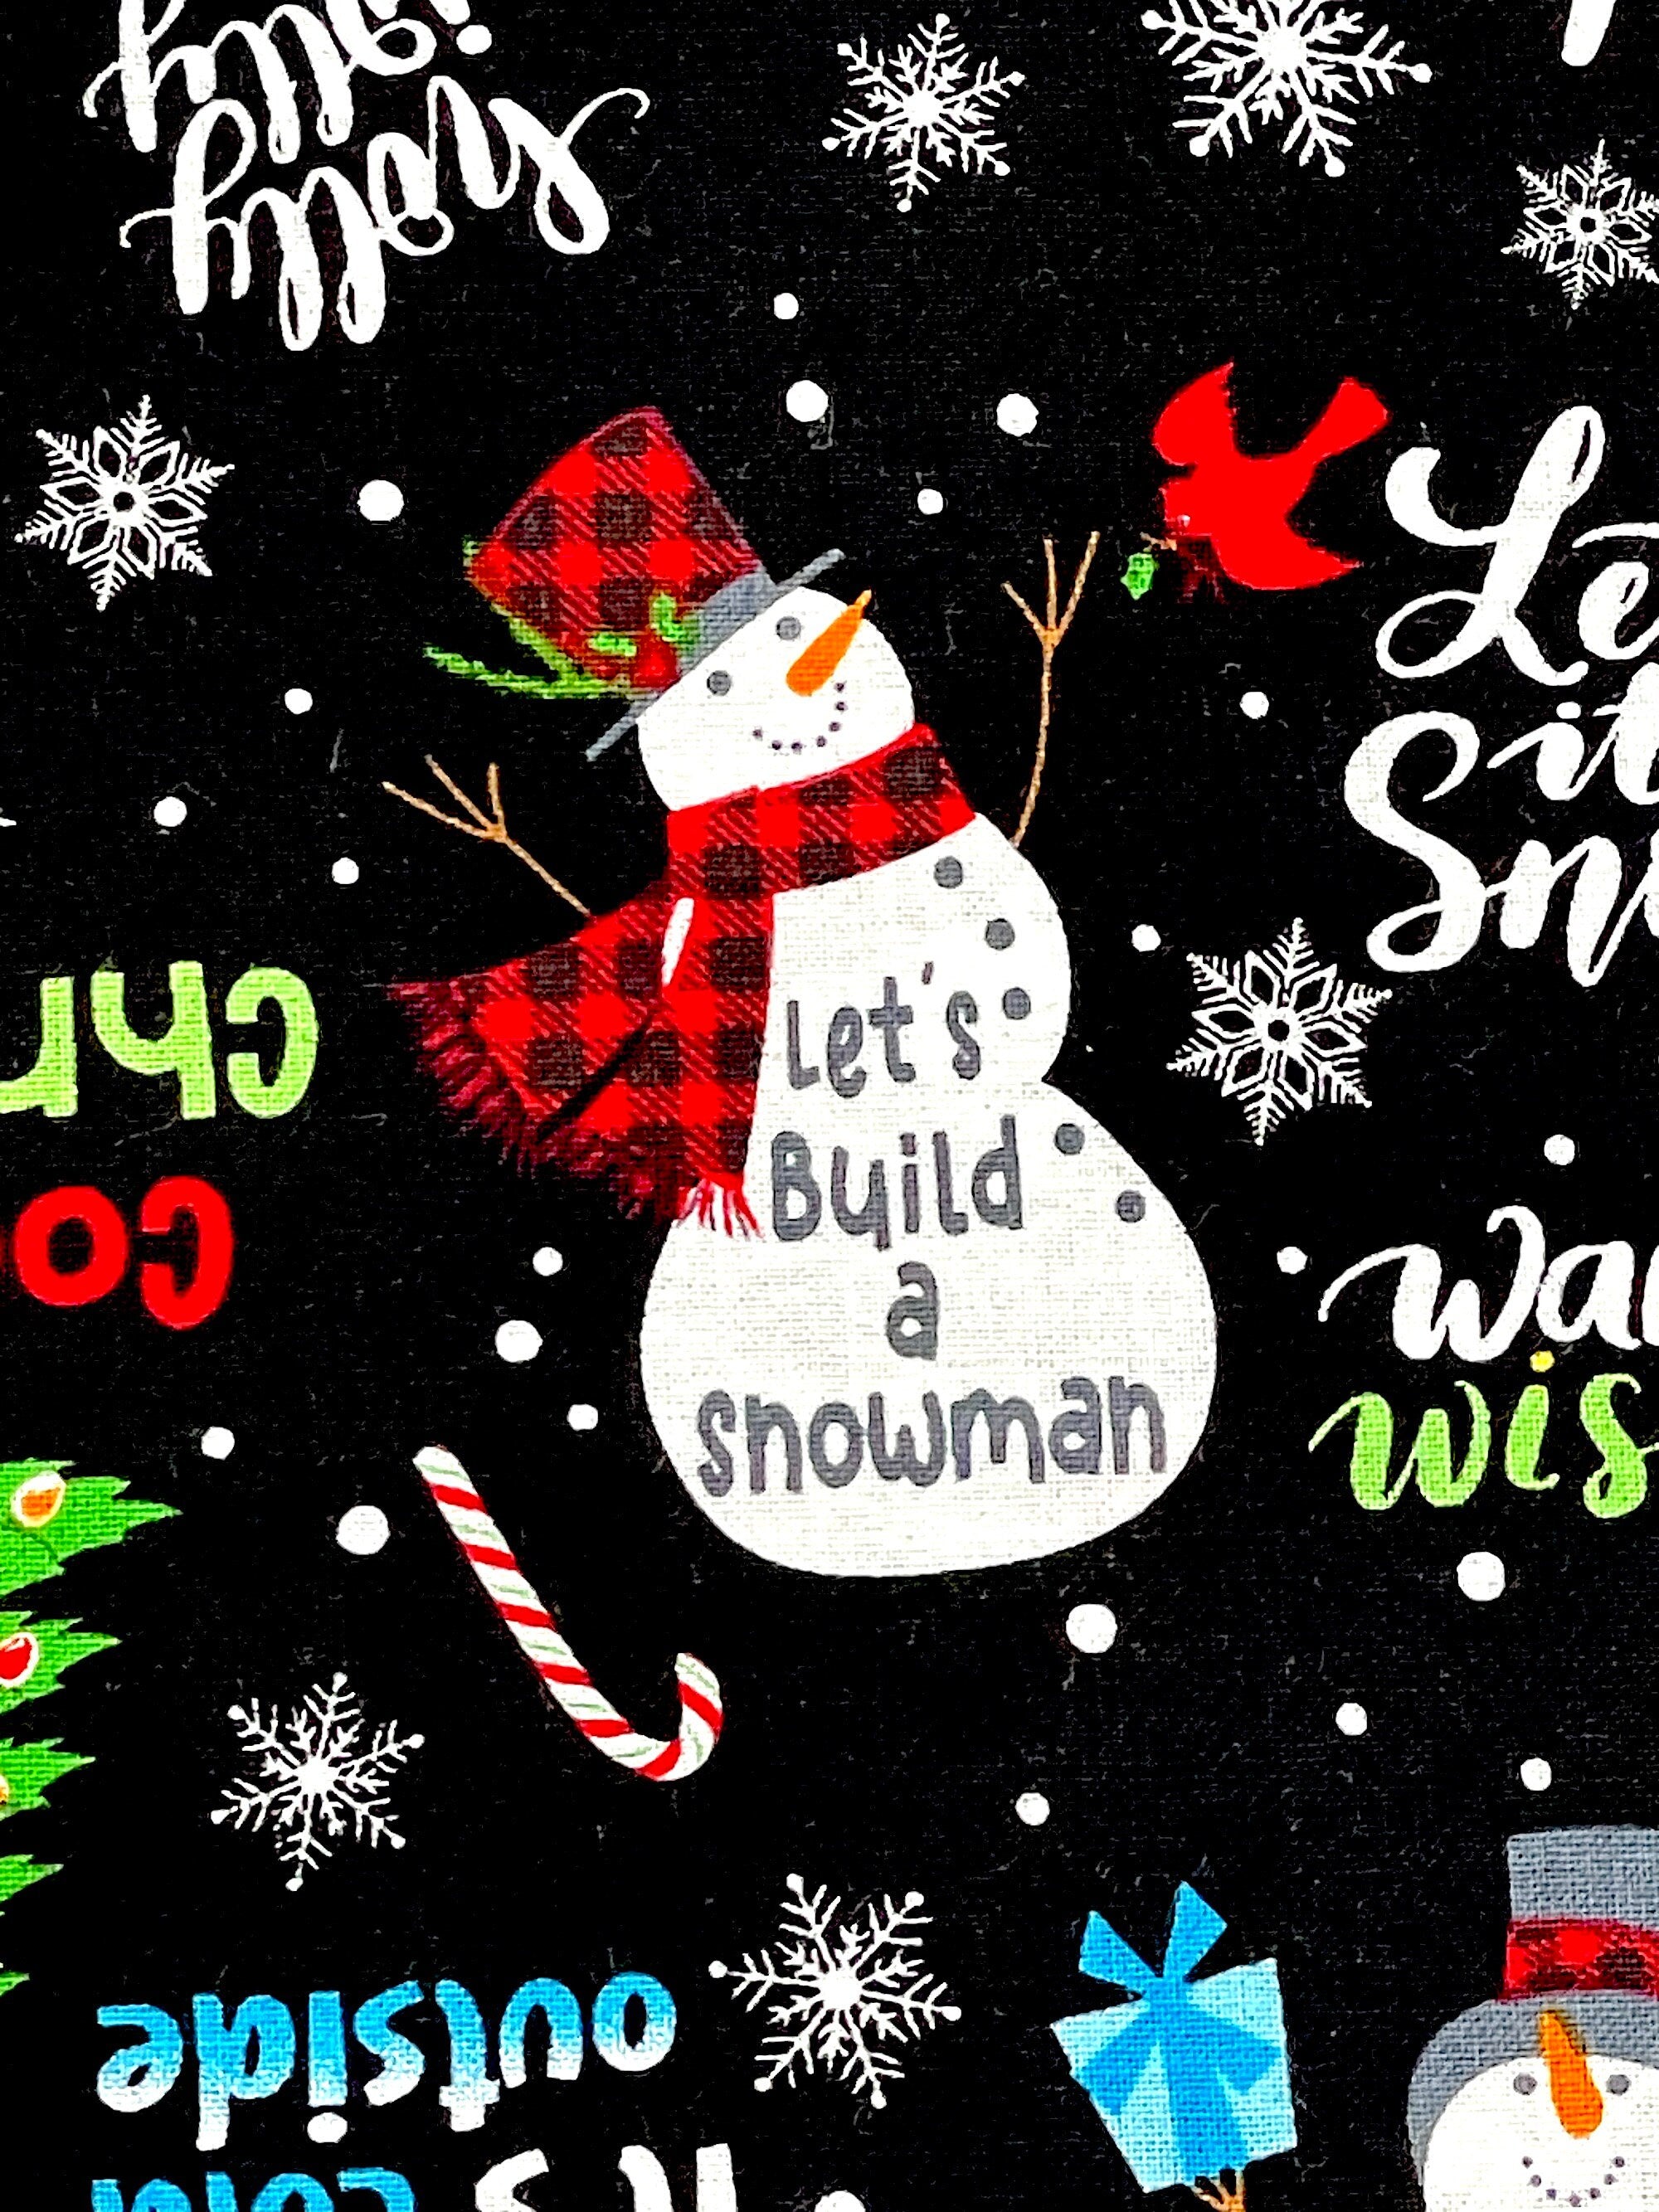 Close up of a snowman wearing a red and black hat  and scarf and the saying Let's build a snowman.